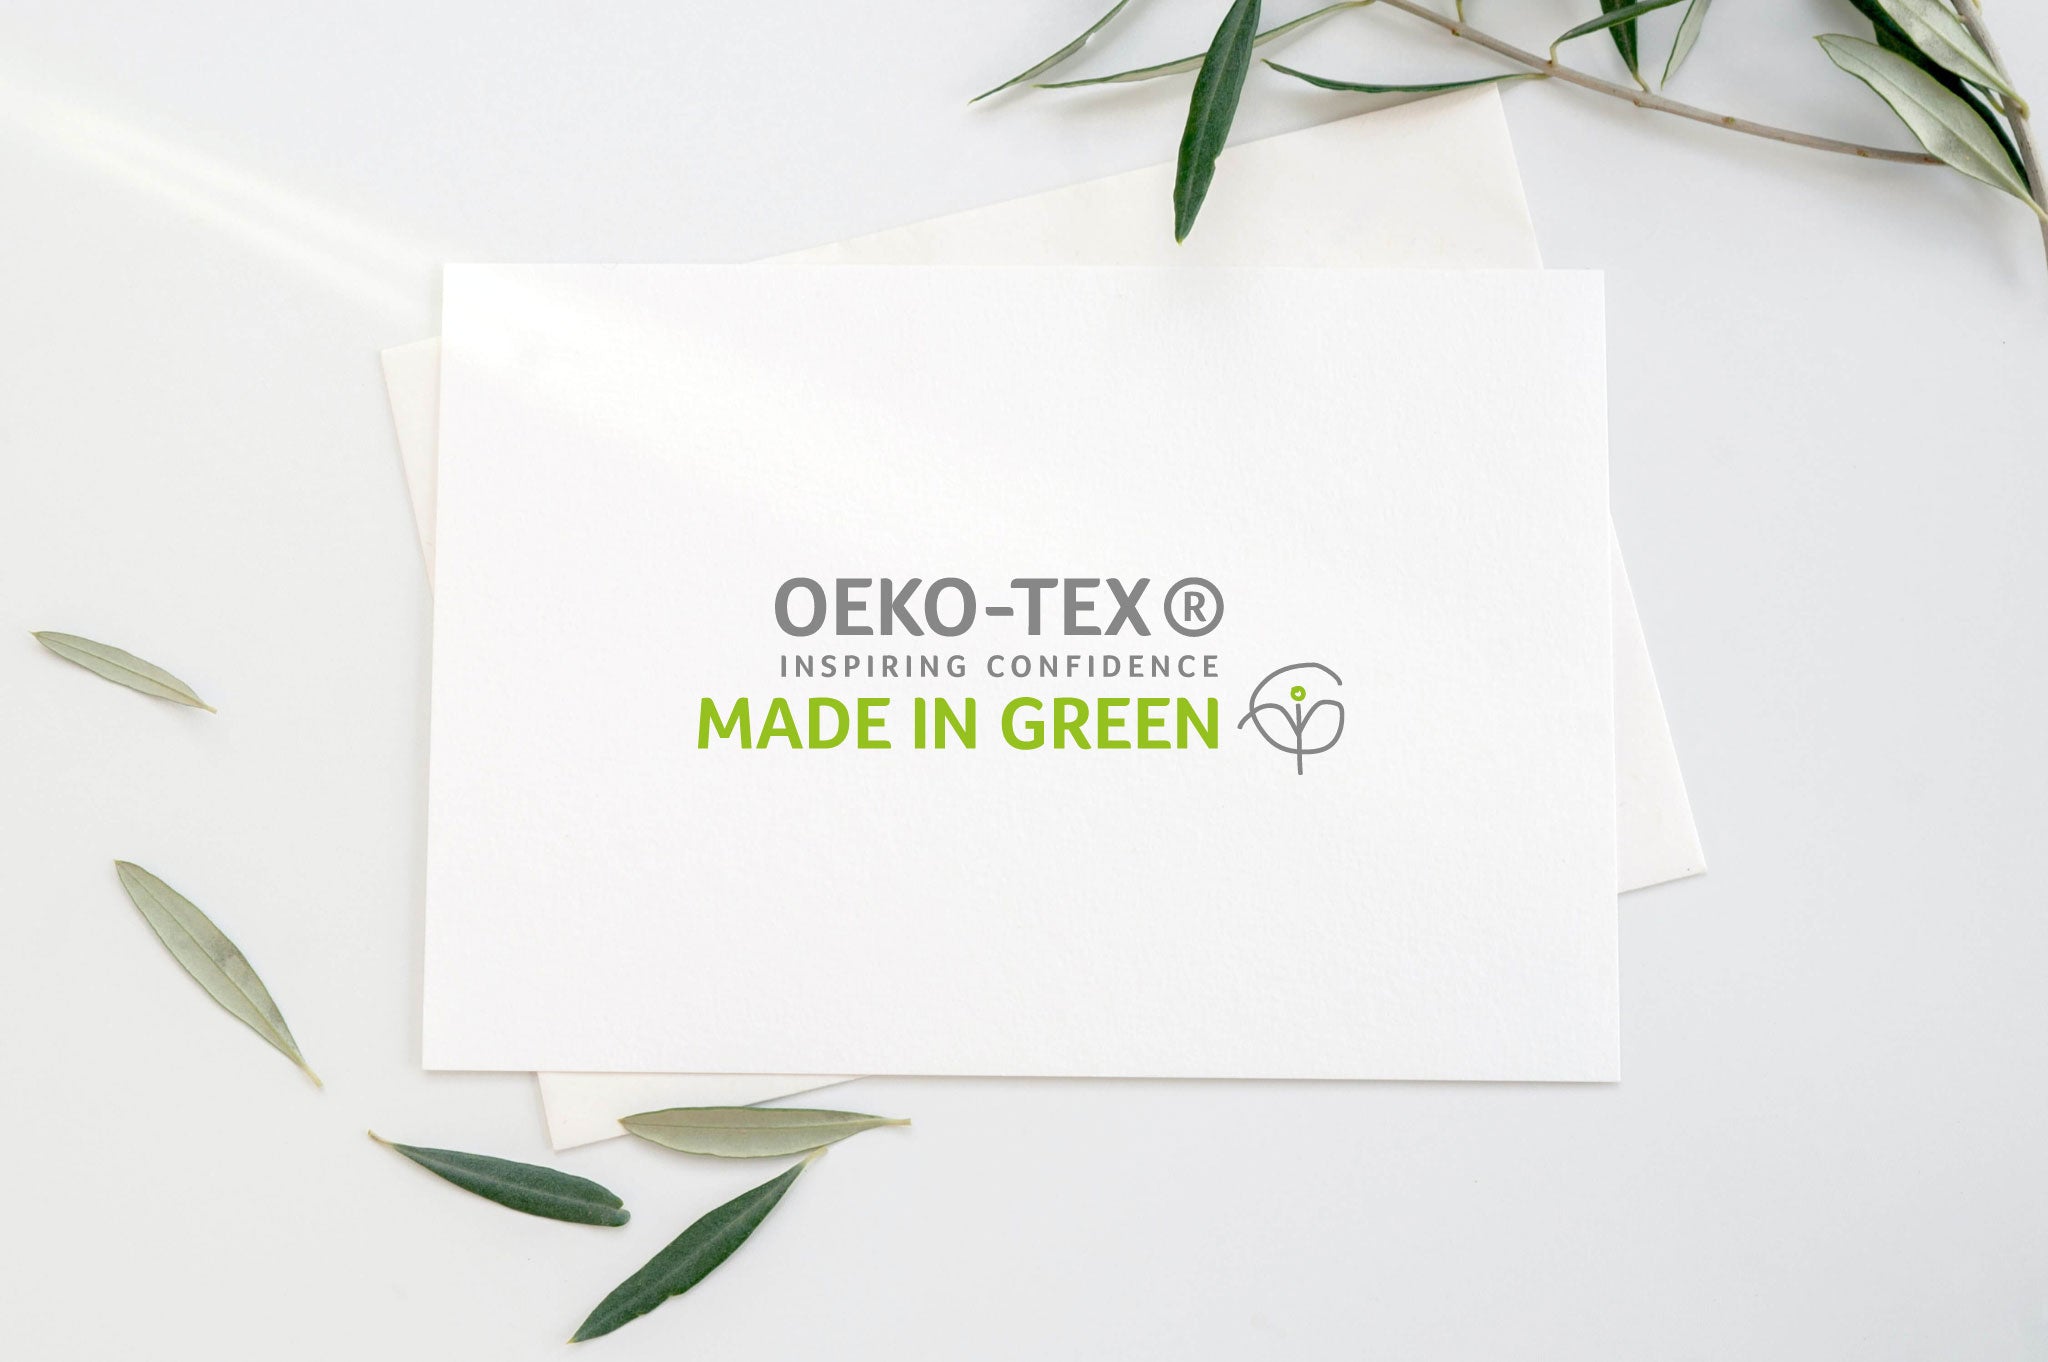 OEKO-TEX®? GOTS? What Those Textile Certifications Mean - Houseopedia